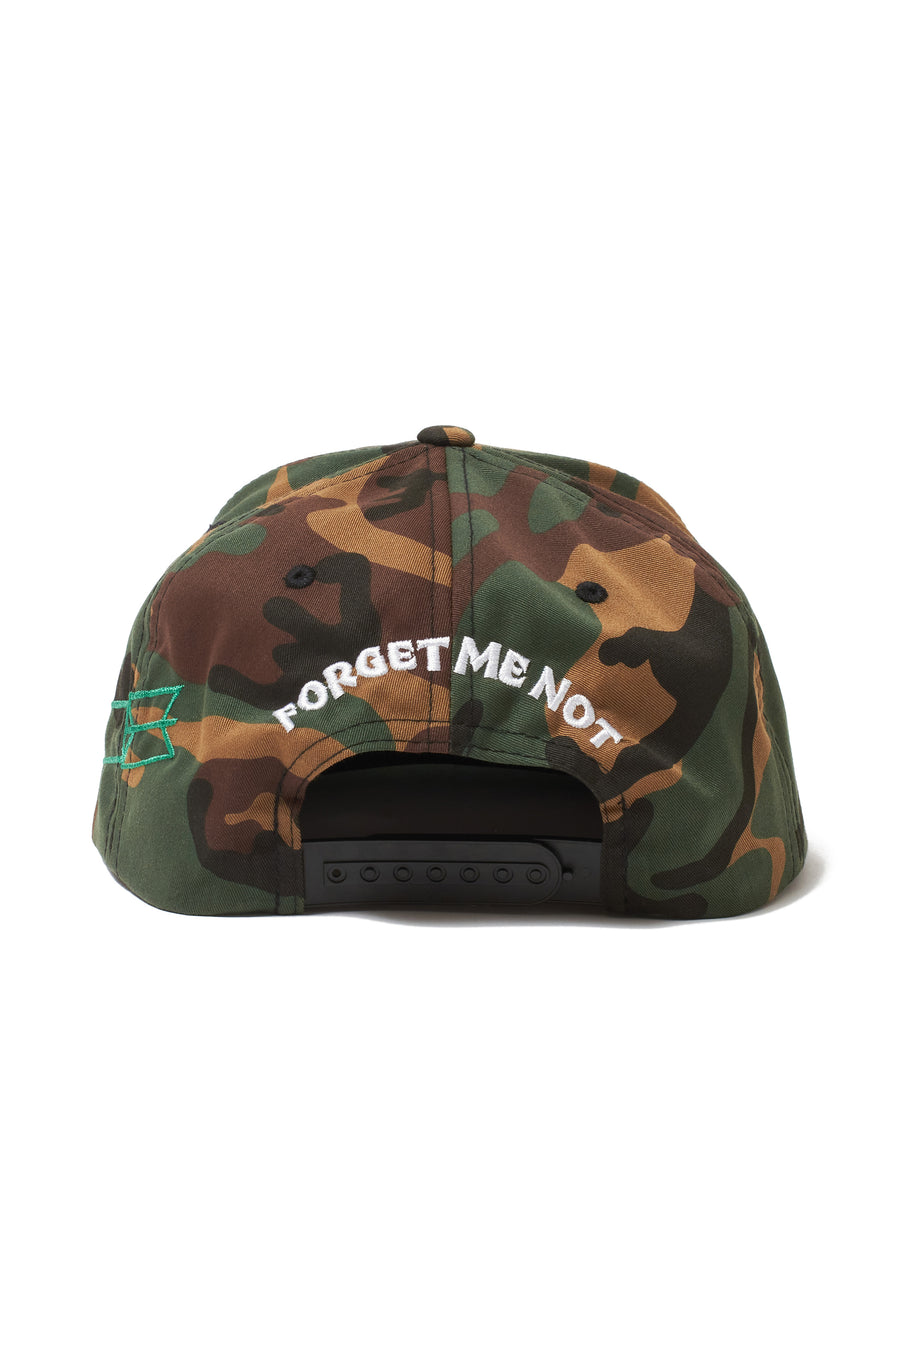 【WEB LIMITED】MAYO RAT FORGET ME NOT Embroidery CAP - CAMO